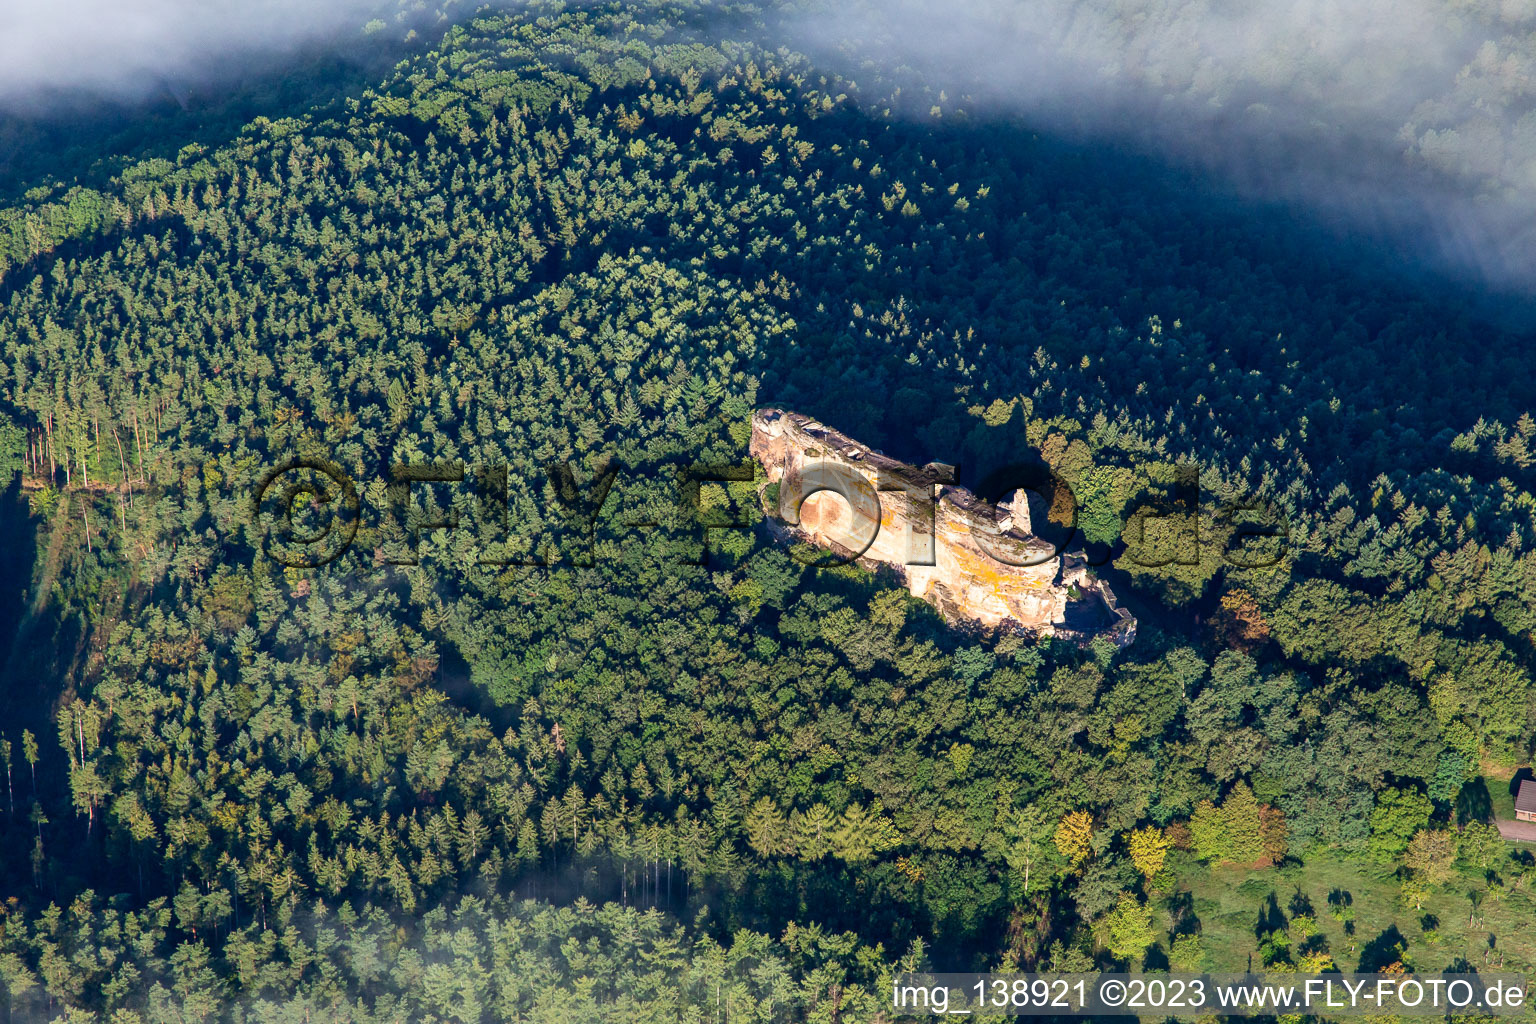 Château Fort de Fleckenstein in Lembach in the state Bas-Rhin, France seen from a drone